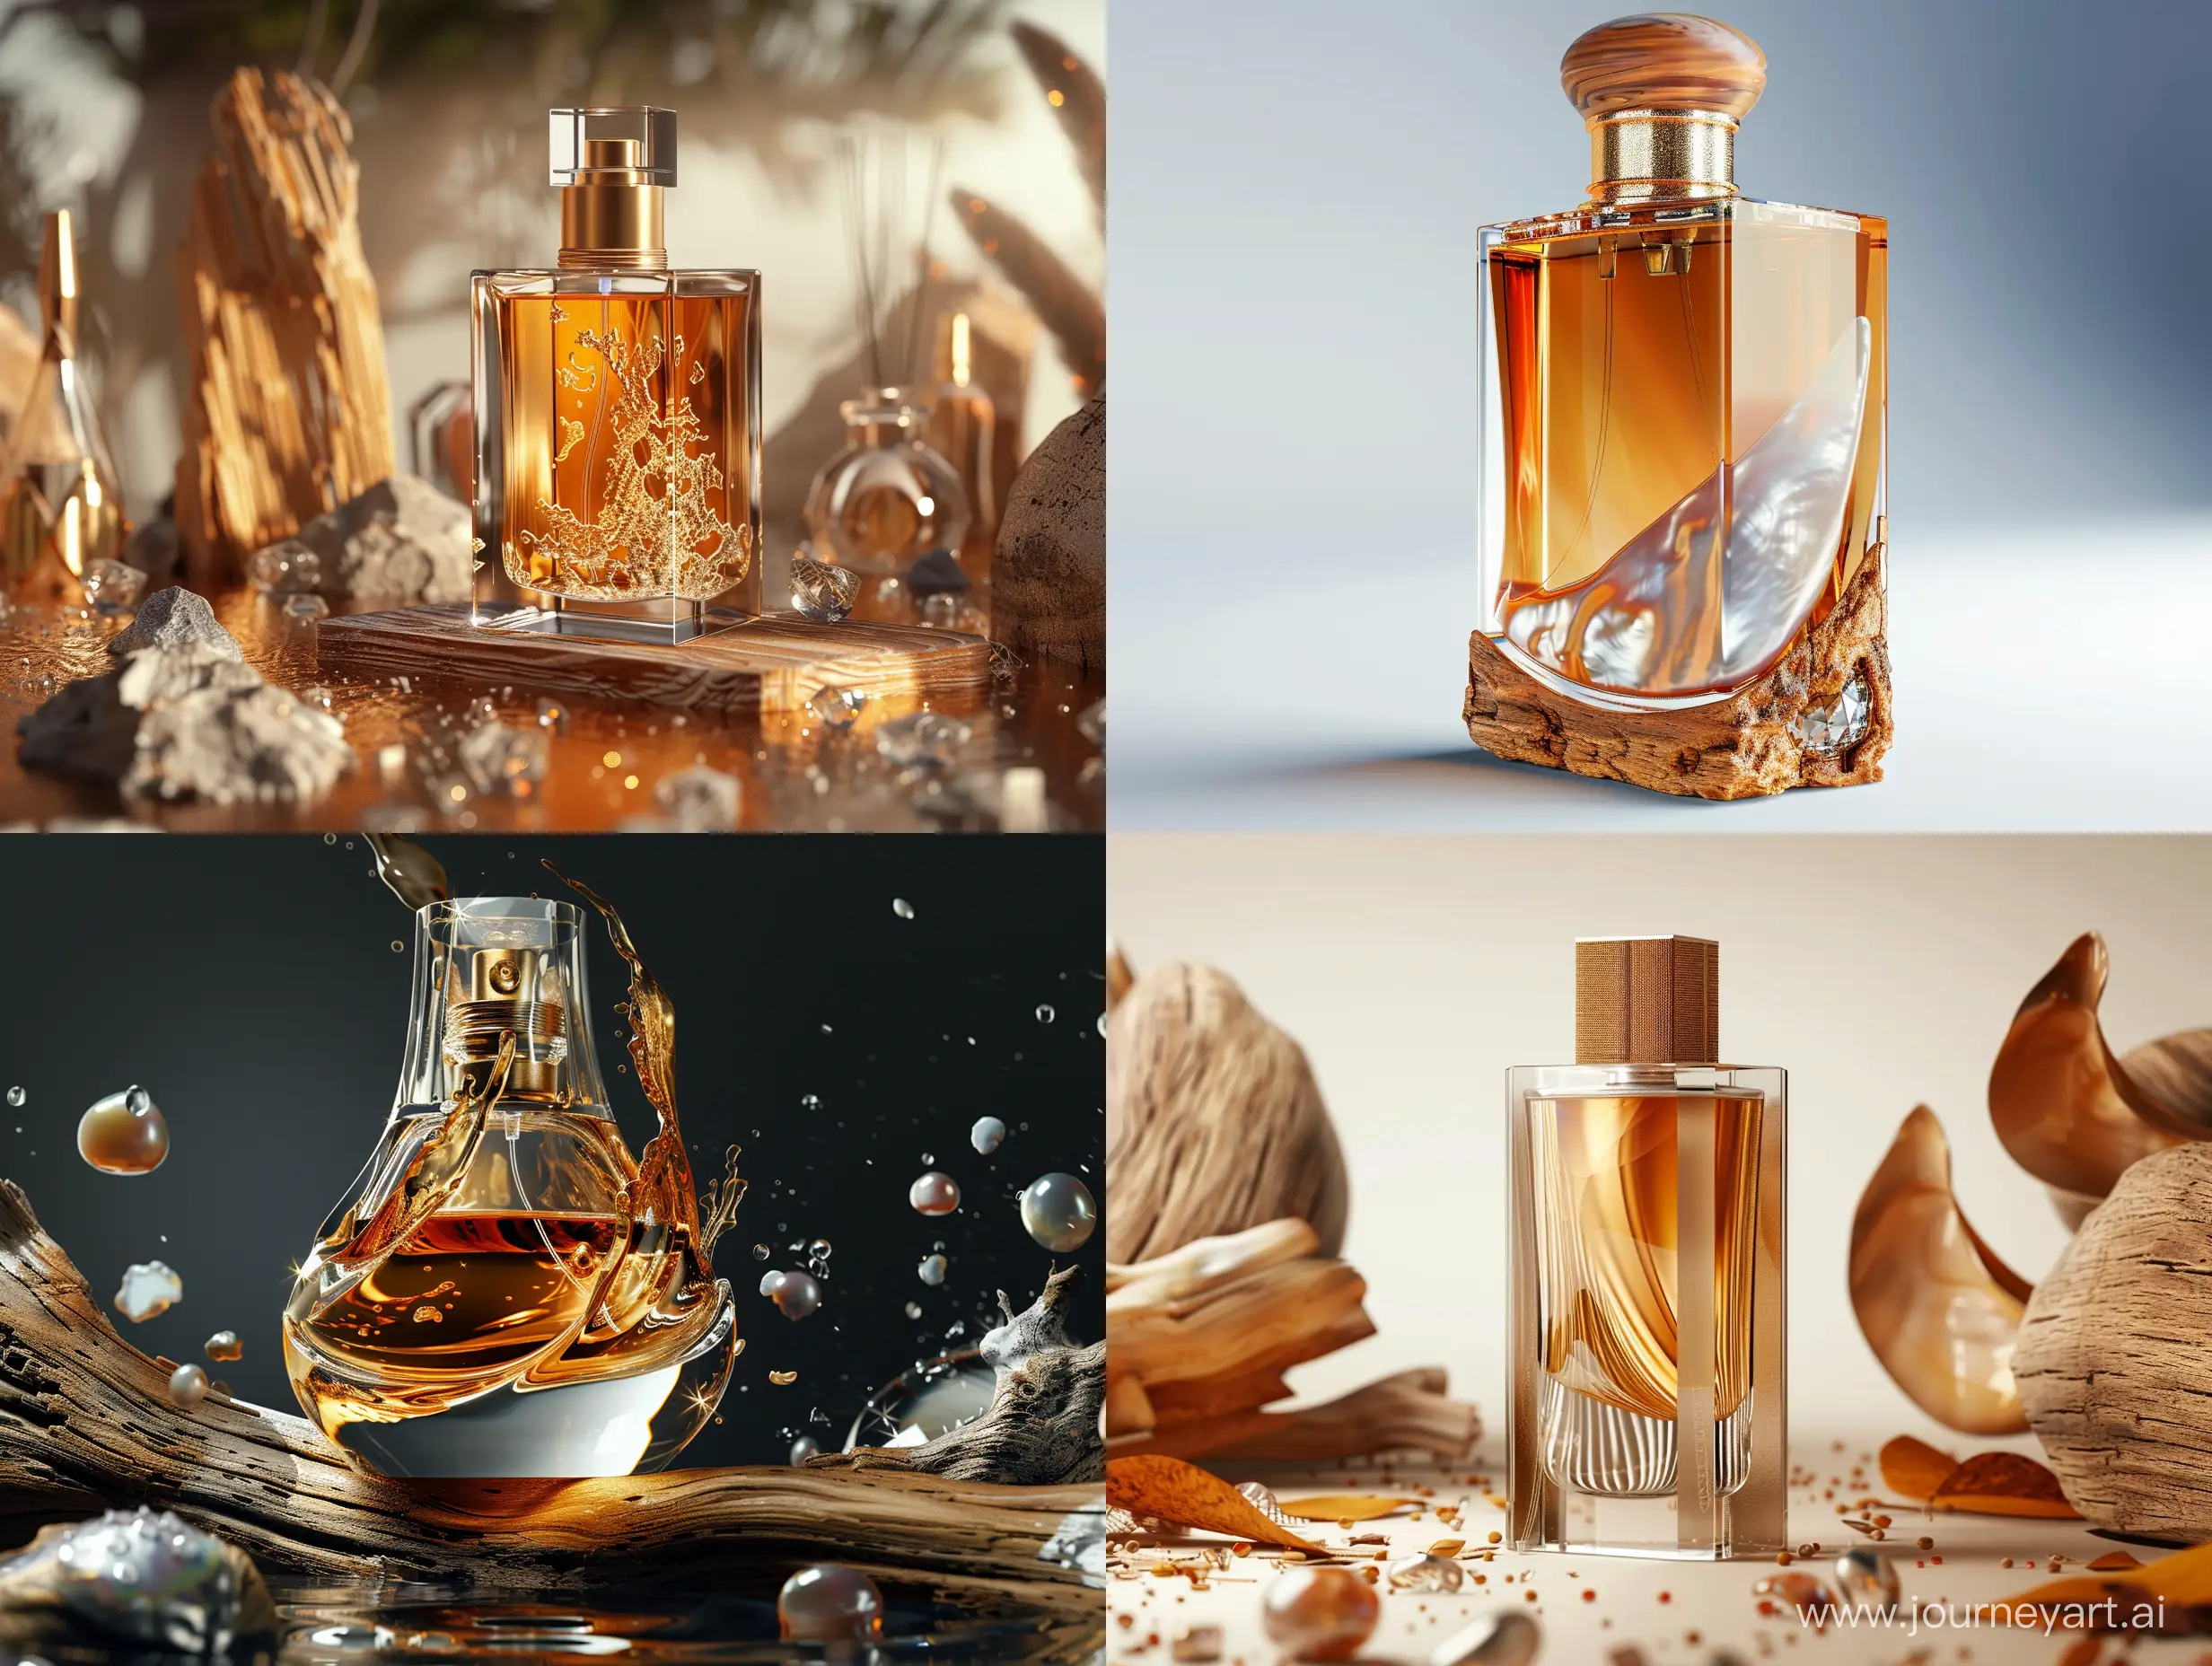 Creative packaging, photorealistic images, commercial photo retouching, packaging for perfumes, expensive perfumes, glass, wood, a little metal, gold – mother-of-pearl shiny liquid, premium class, woody, sophisticated, charismatic, charming, courageous, durable, many elements, high-quality Rendering, Commercial photography